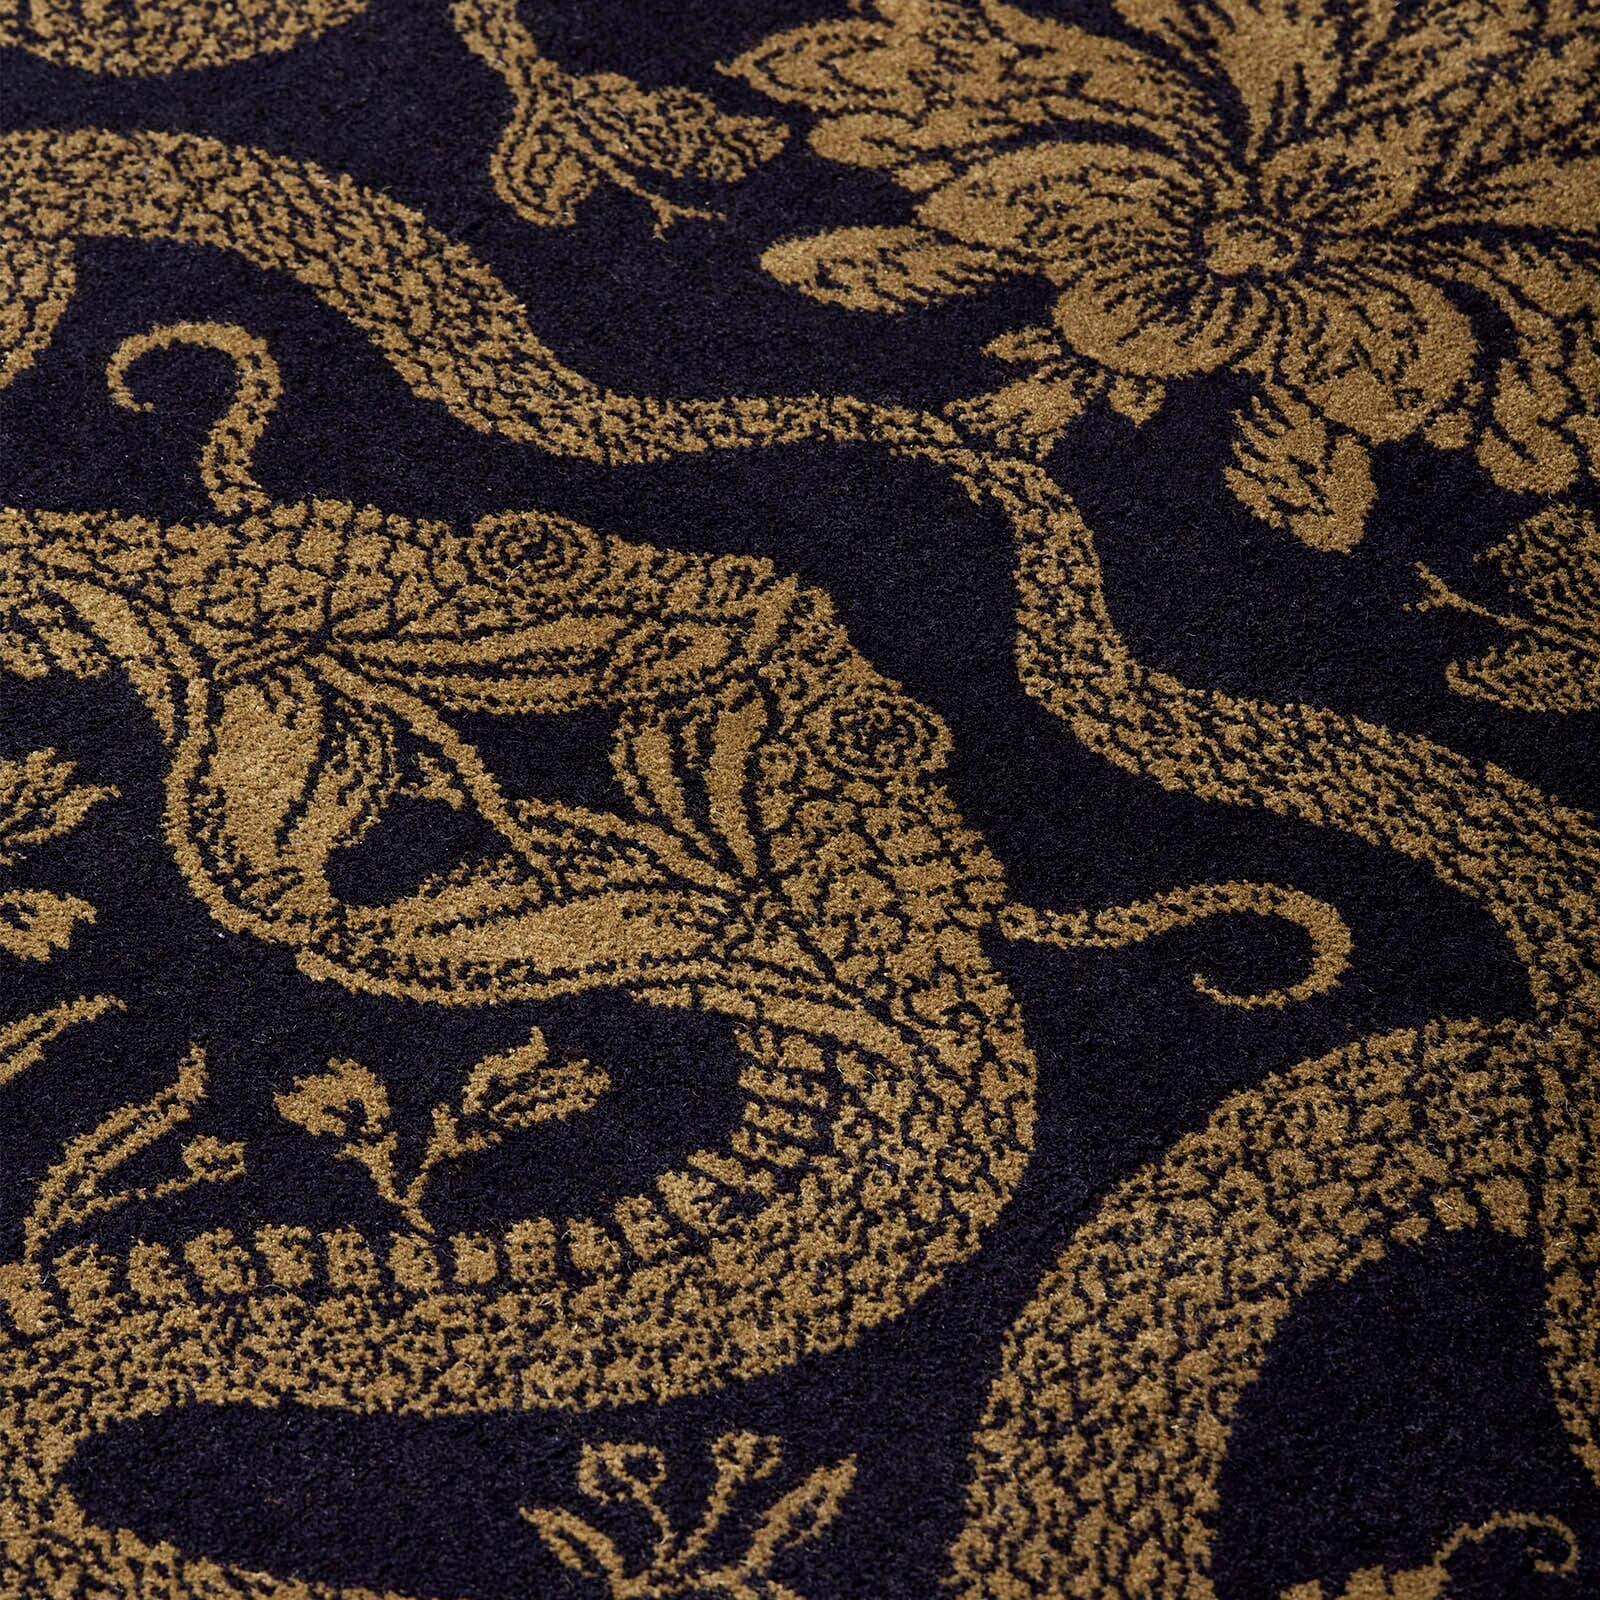 Fear not the snakes slithering across the floor of your home for these are our House symbols of transformation and renewal. In a dramaticly opulent palette of black and gold the subversively beautiful ANACONDA rug is woven by Axminster Carpets the